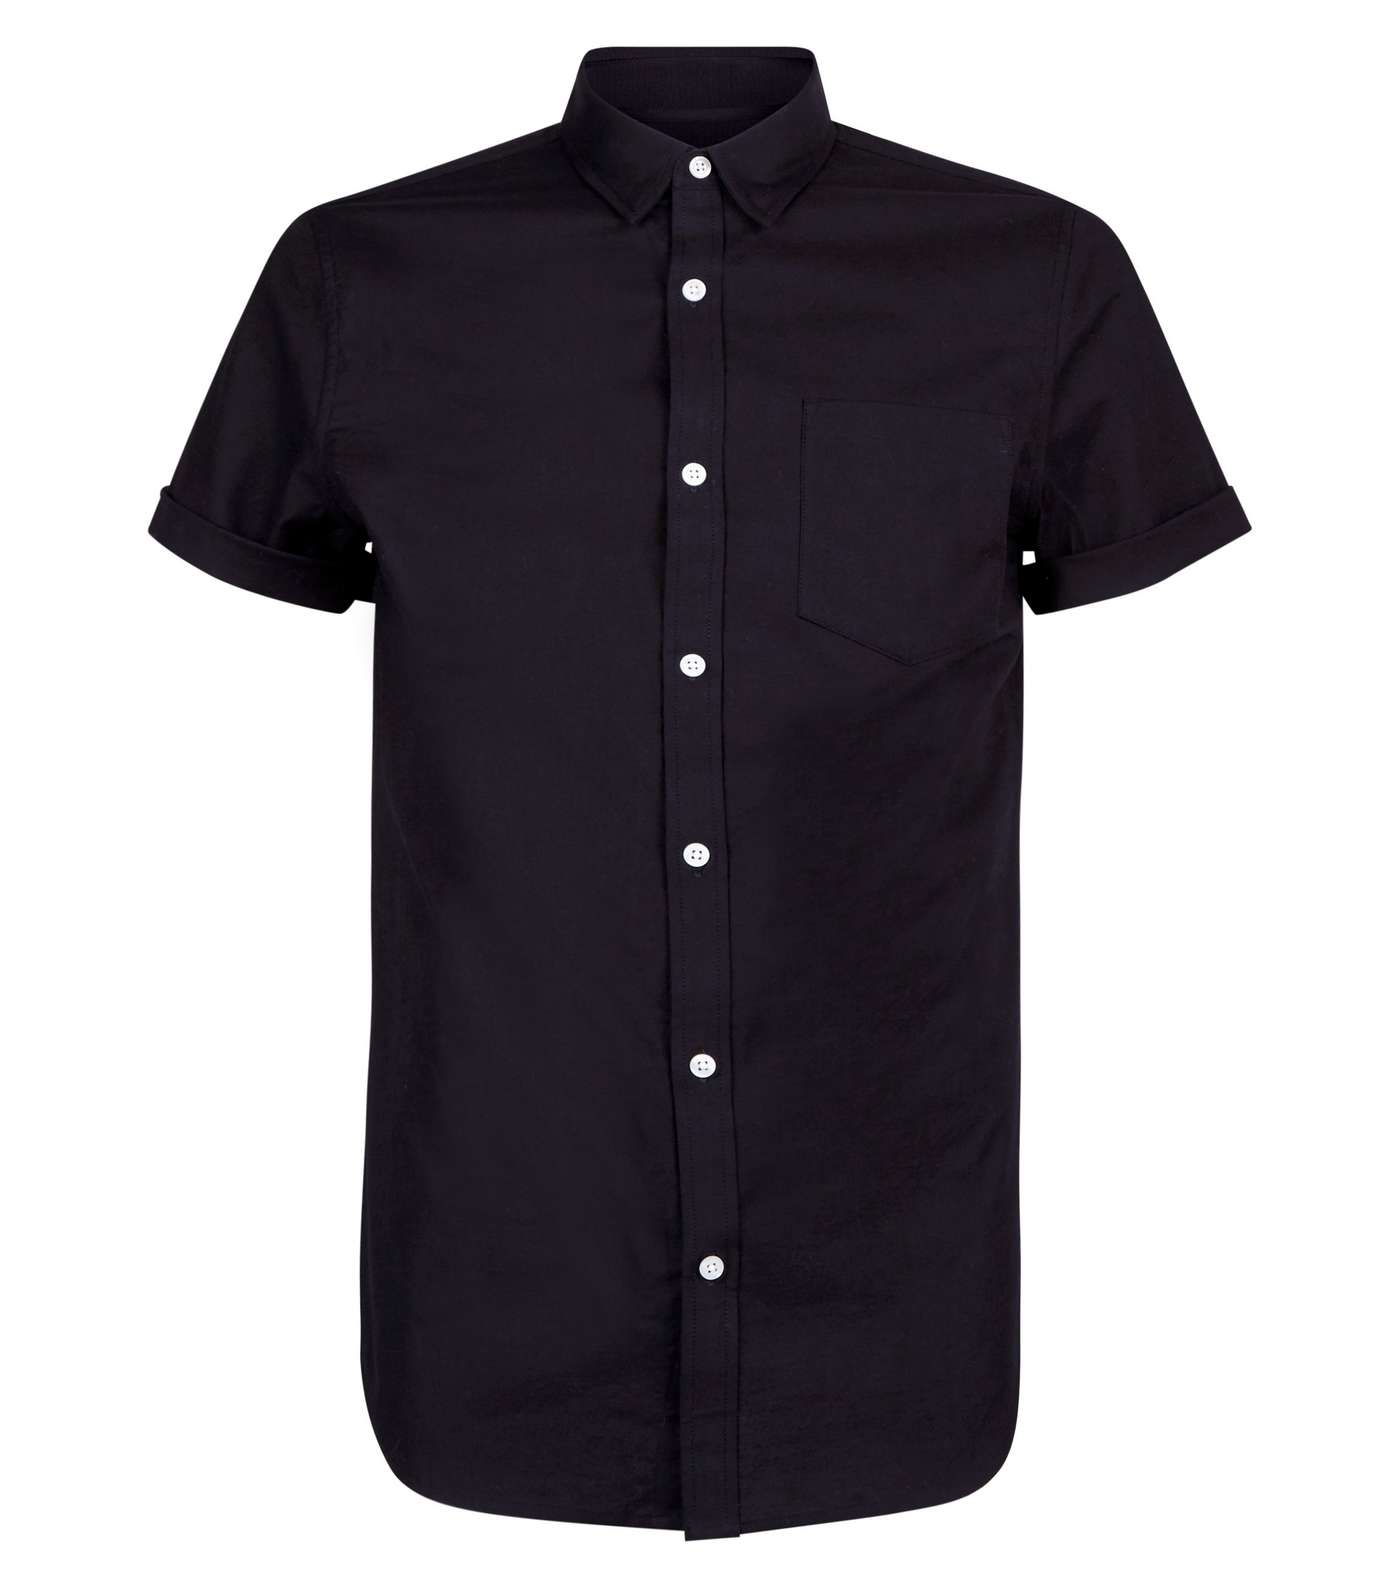 Black Short Sleeve Muscle Fit Oxford Shirt Image 4